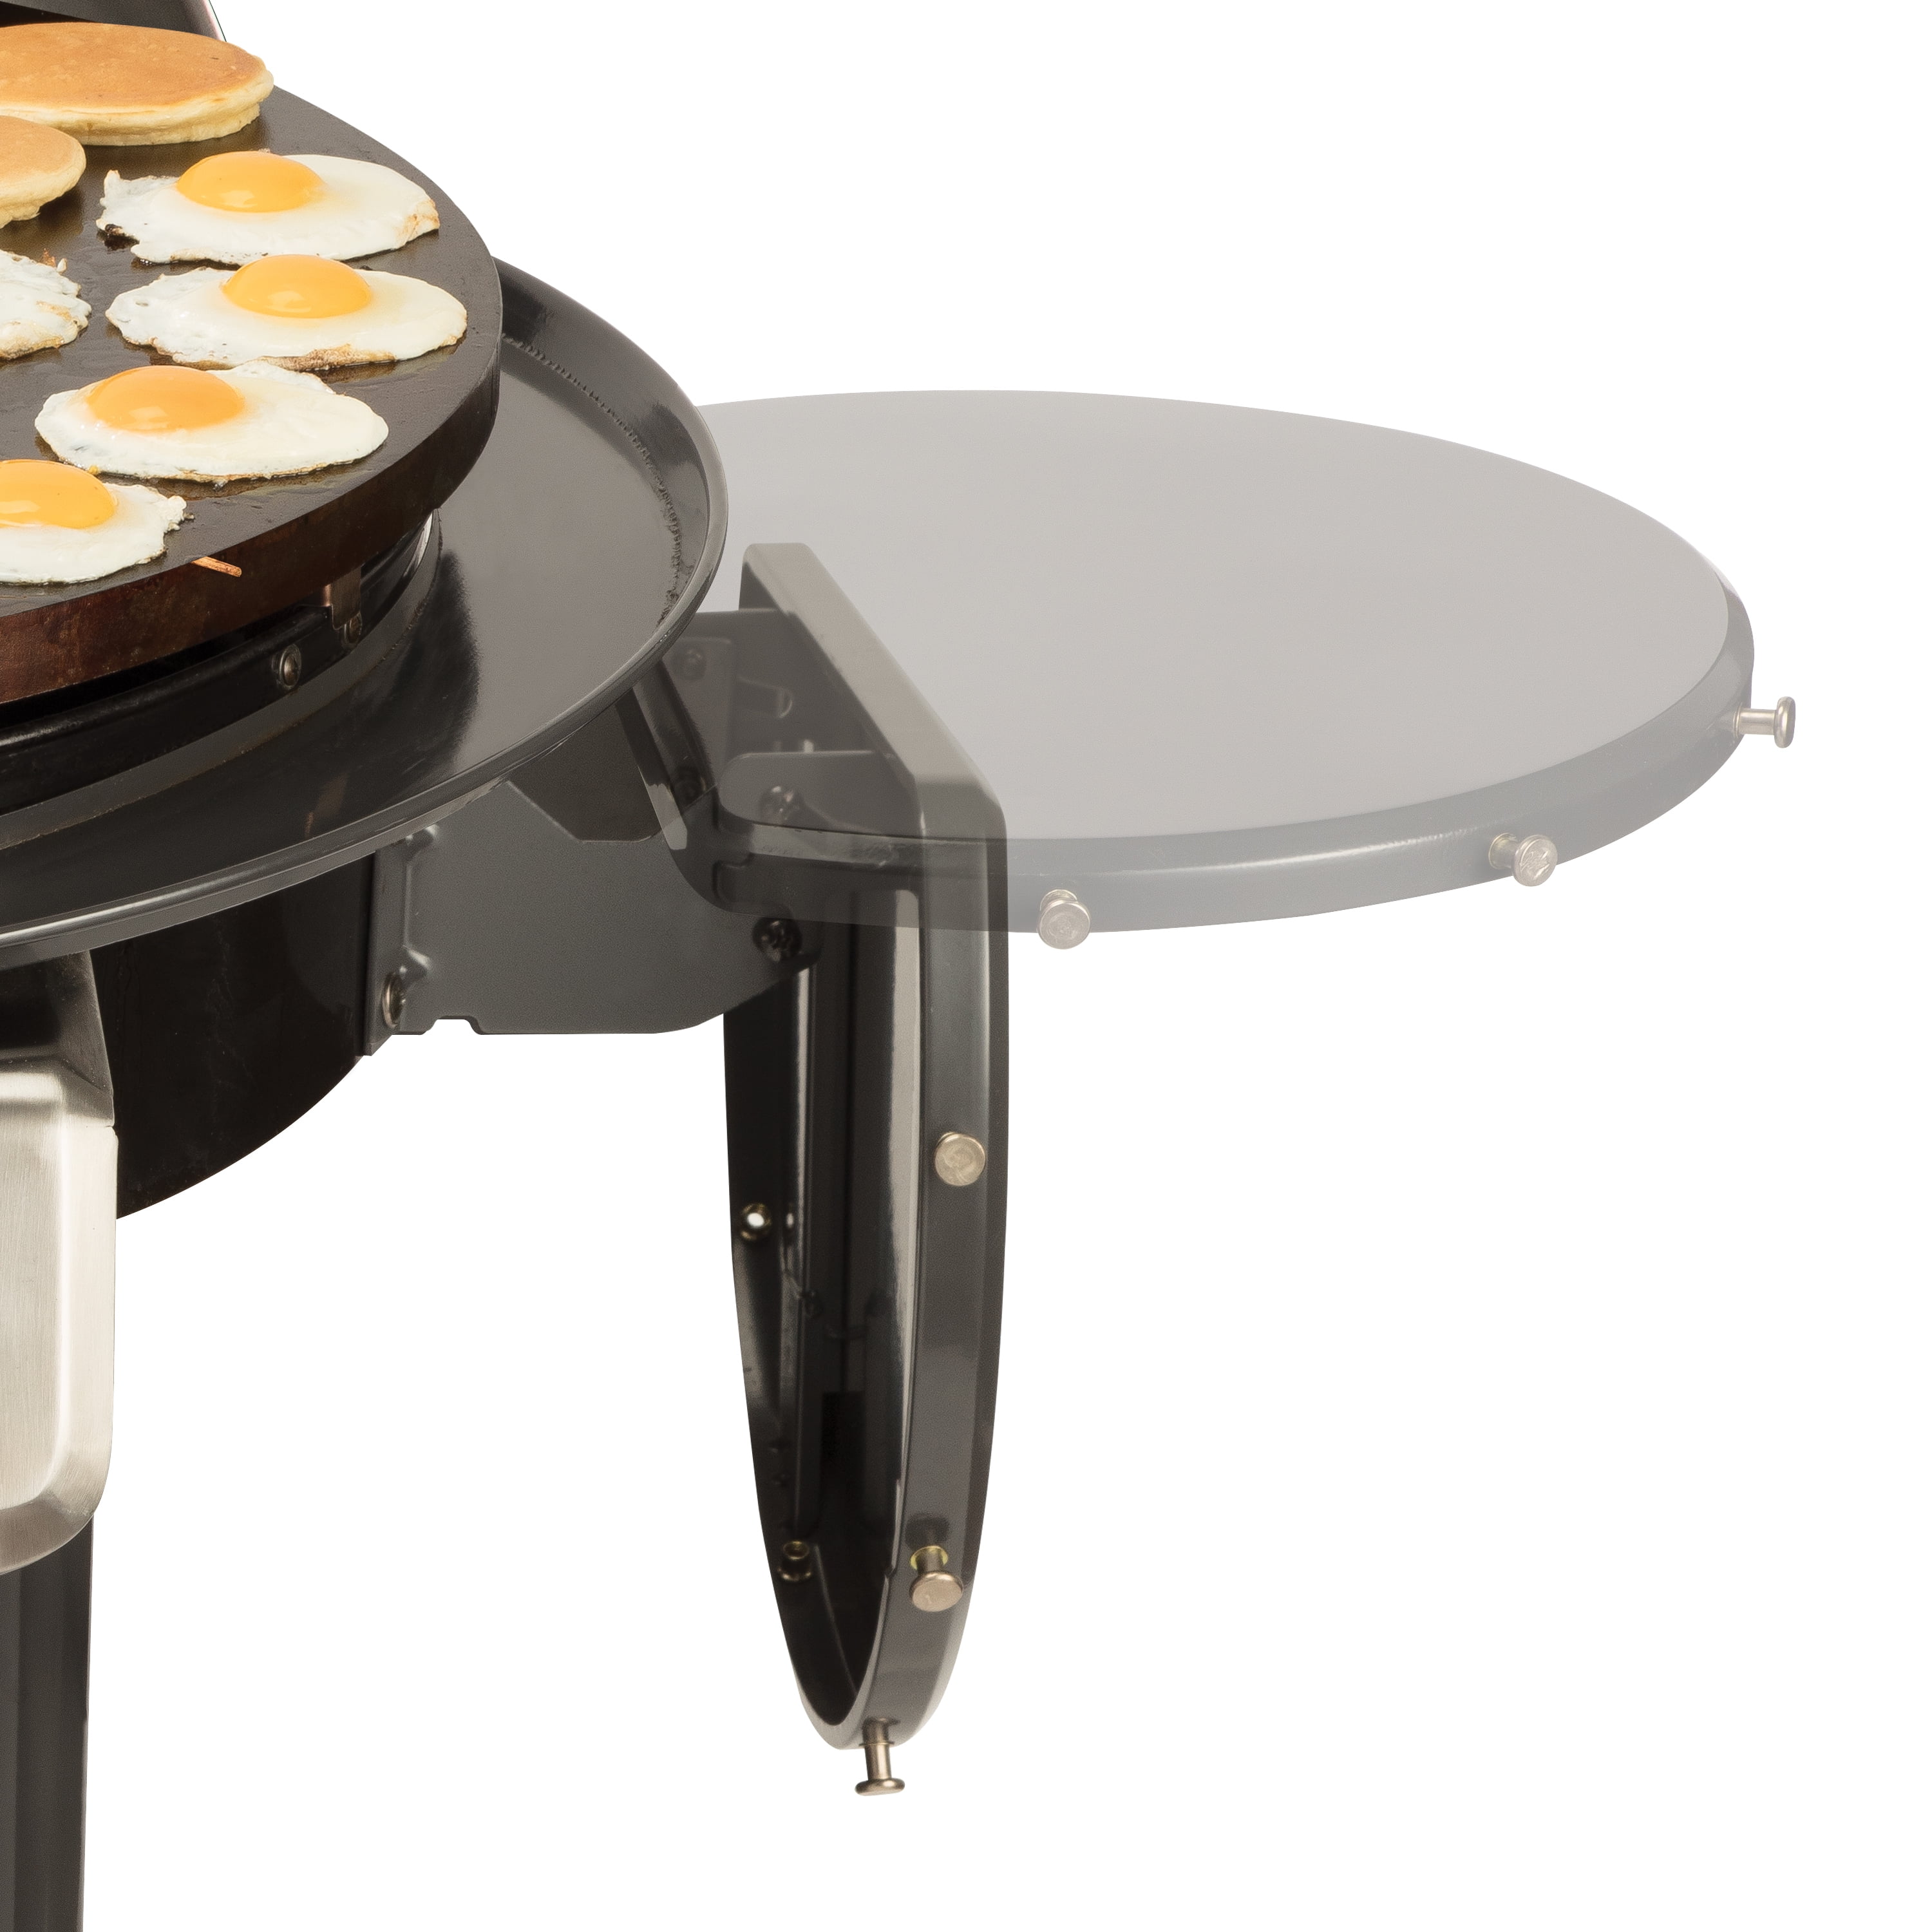 360 XL Griddle Outdoor Cooking Station, Cooking Versatility!